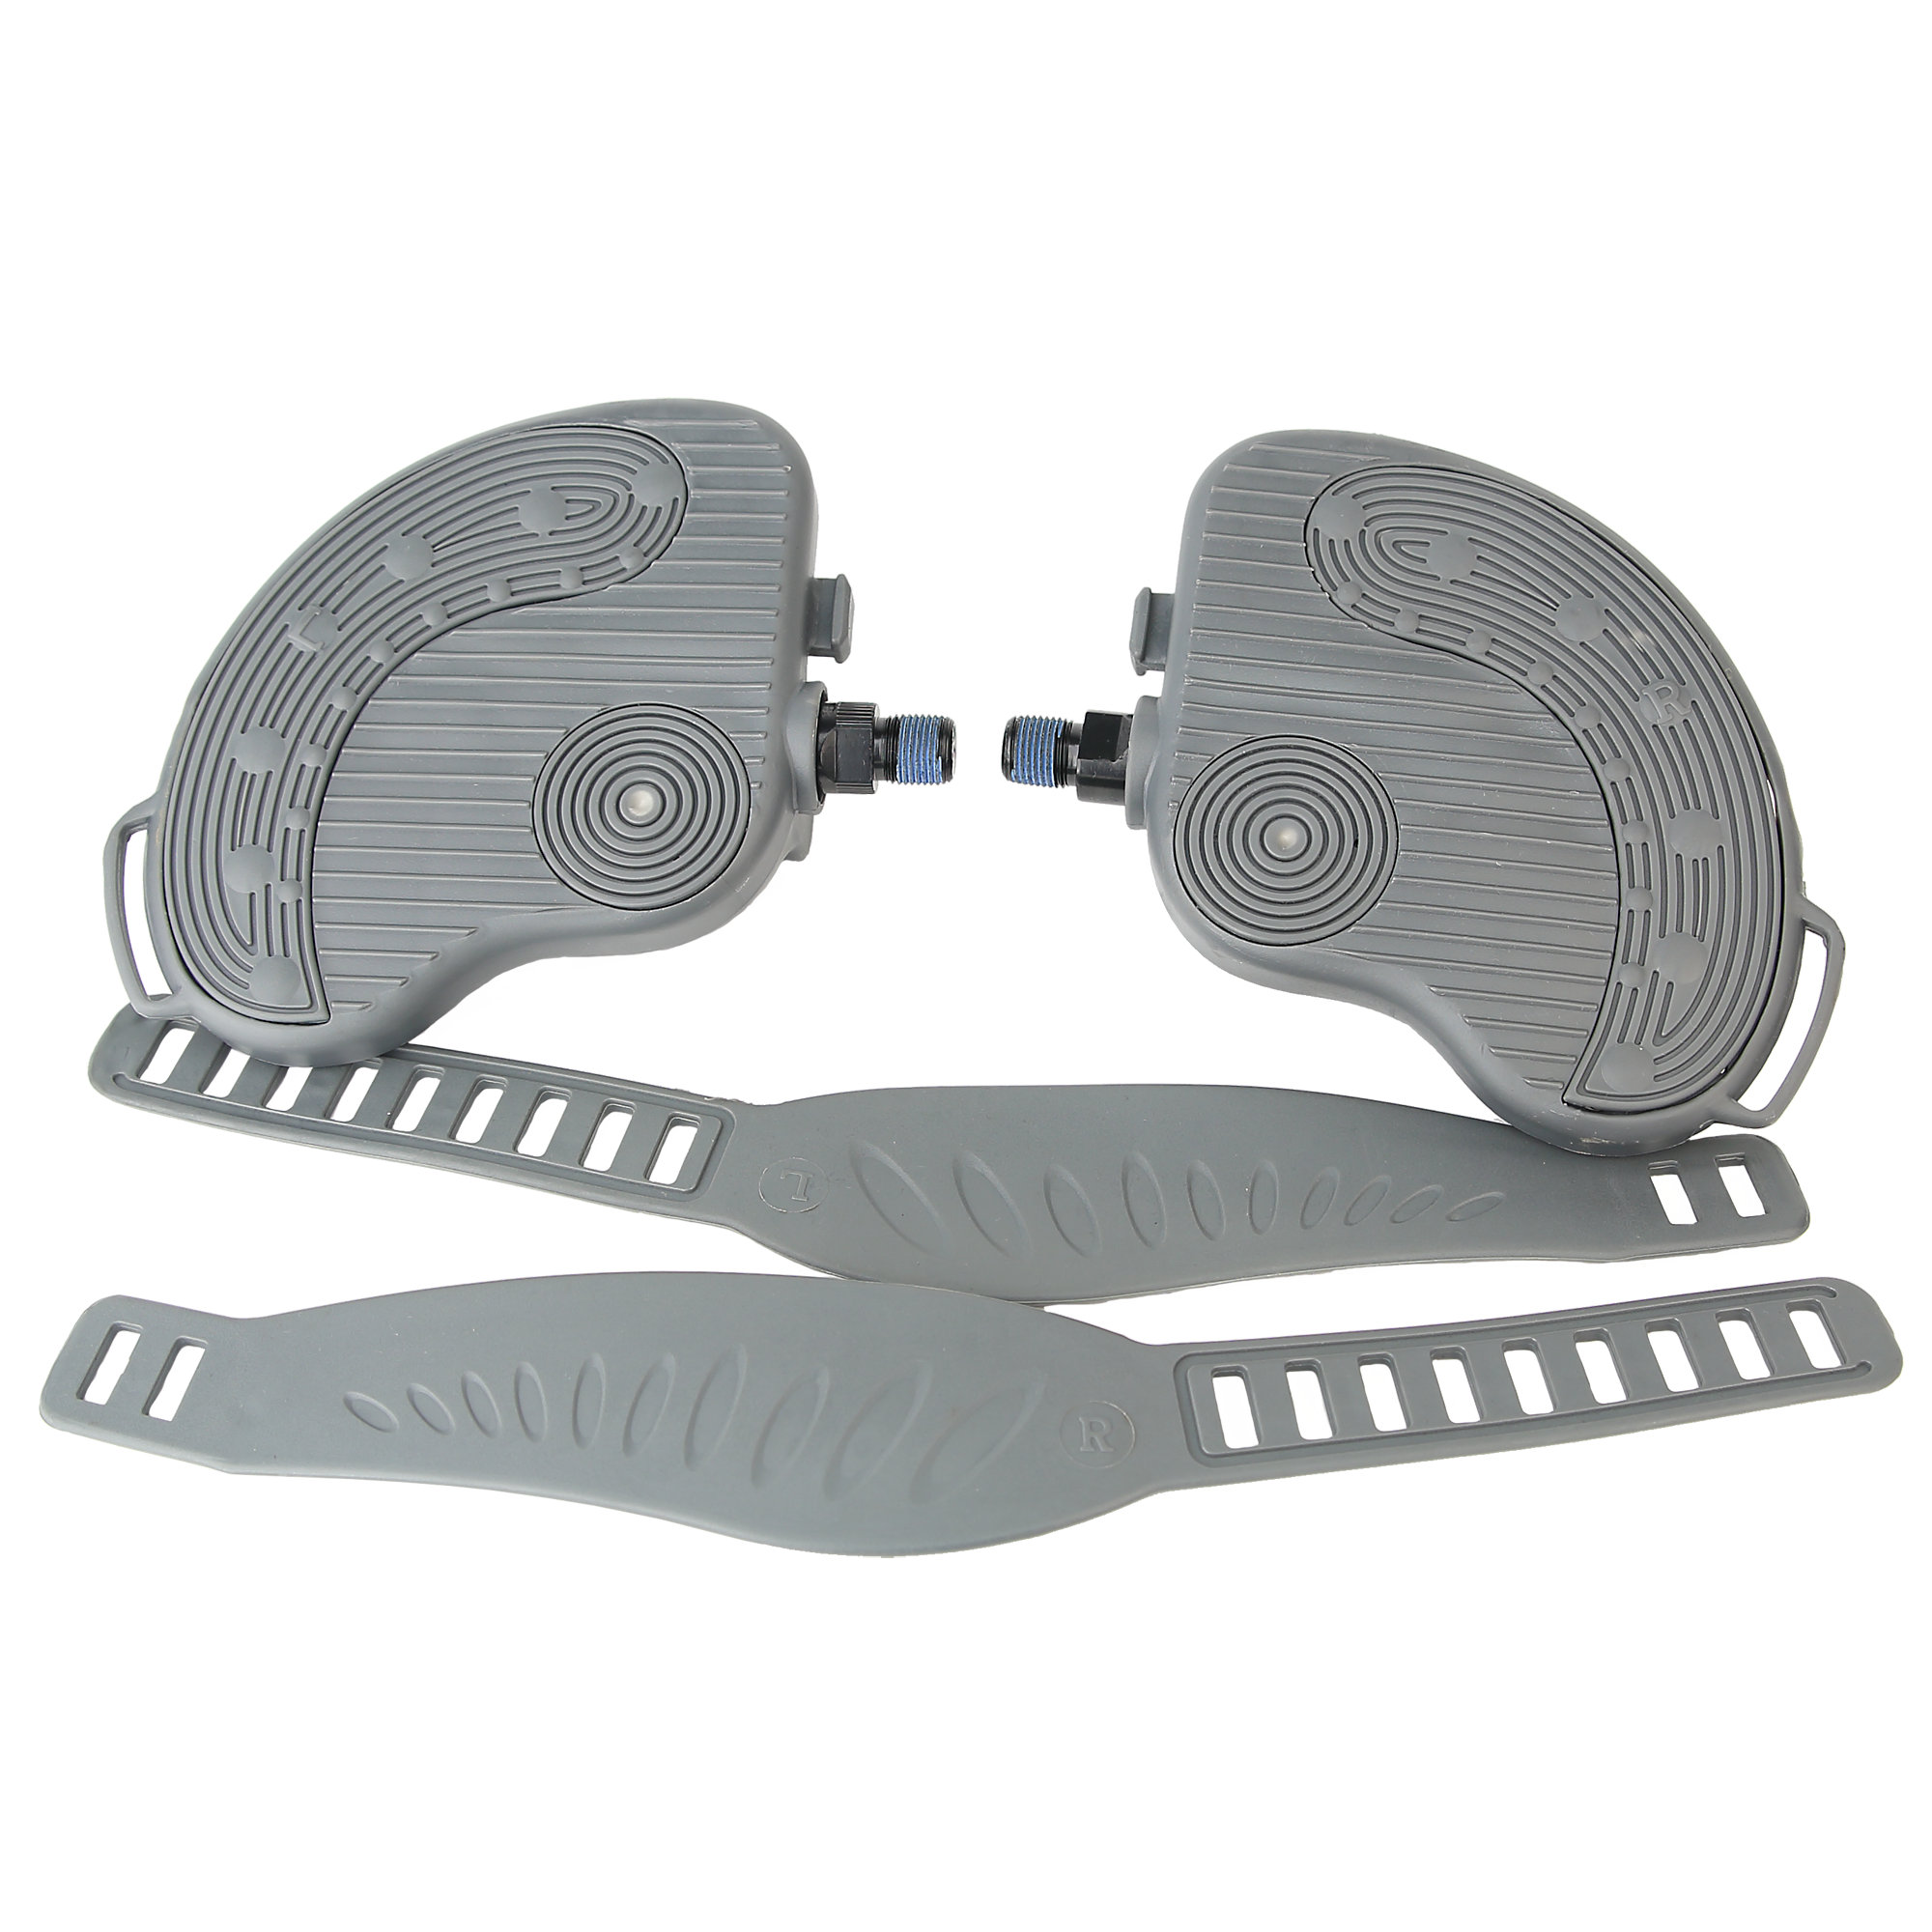 Bike Pedals, Gray Set with Straps "Deluxe", 9/16"